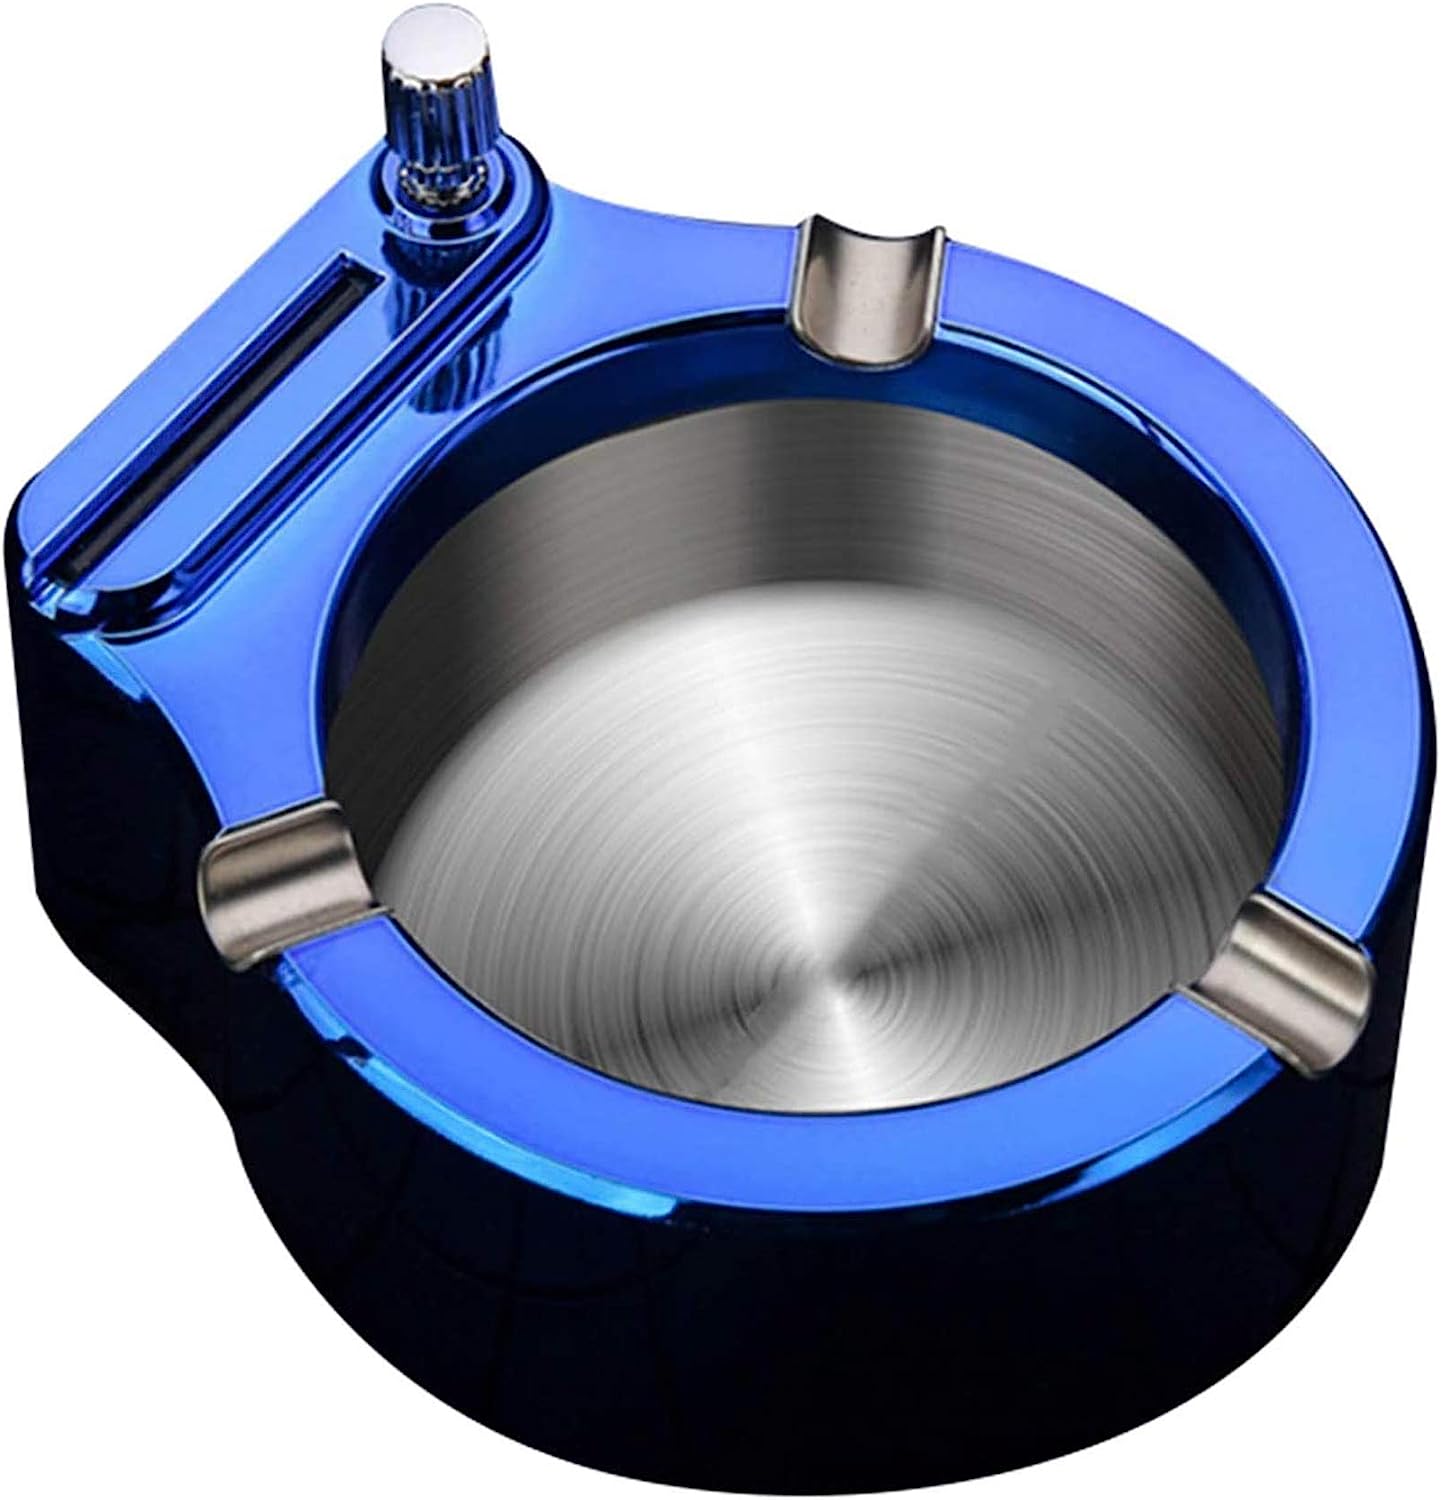 Metal Ashtray with Built-in Match - Blue